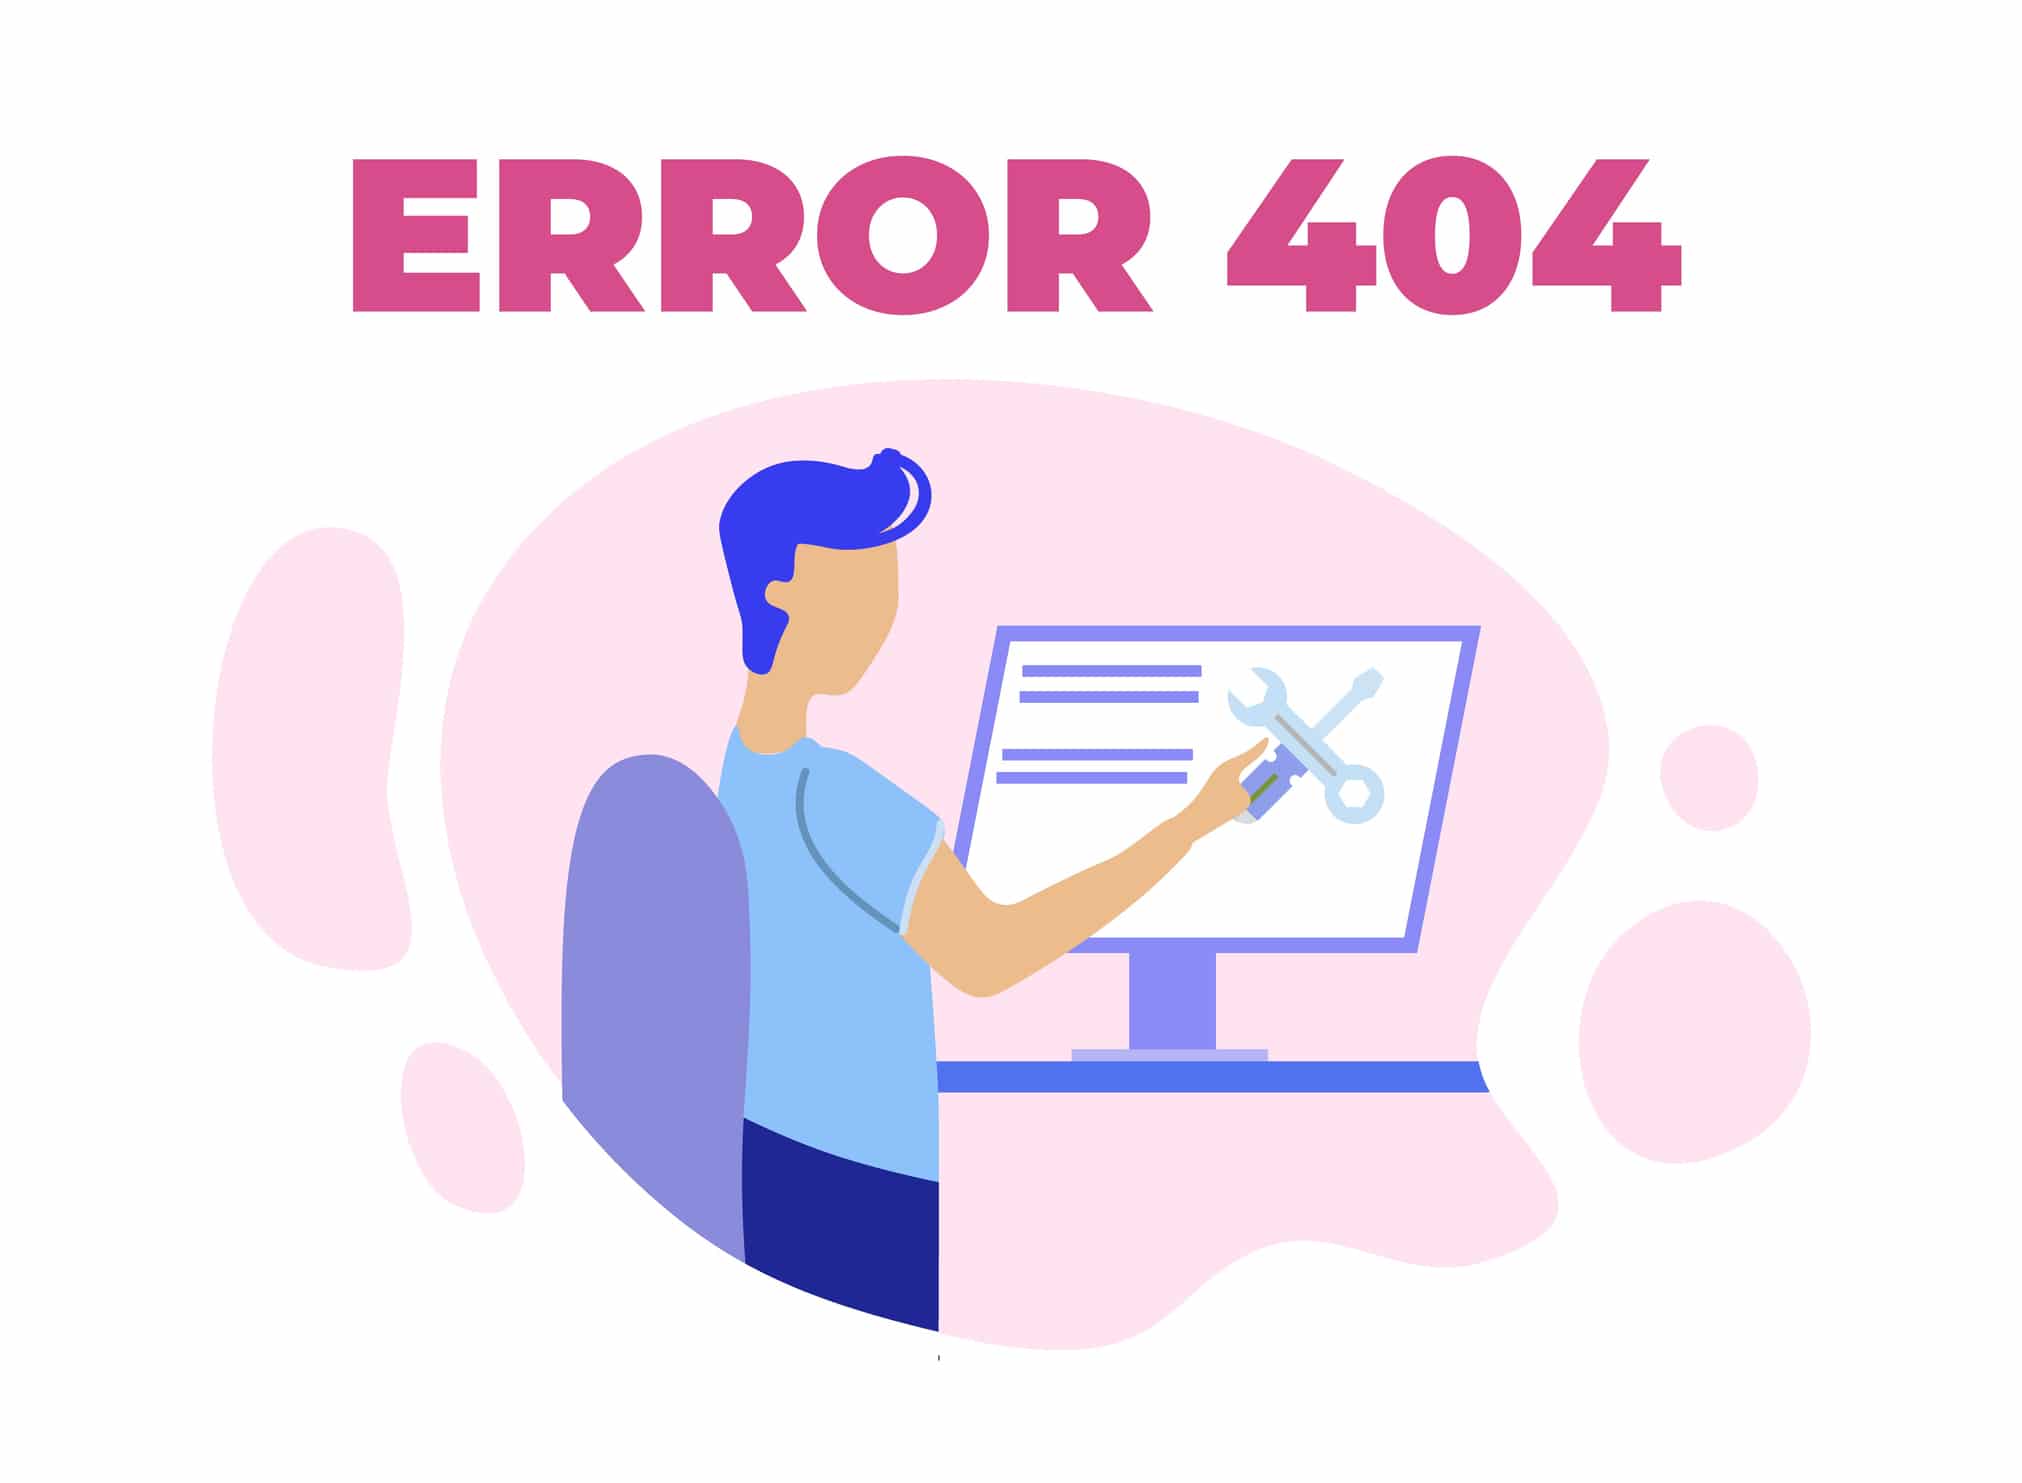 Illustration of a person fixing a 404 error on a computer